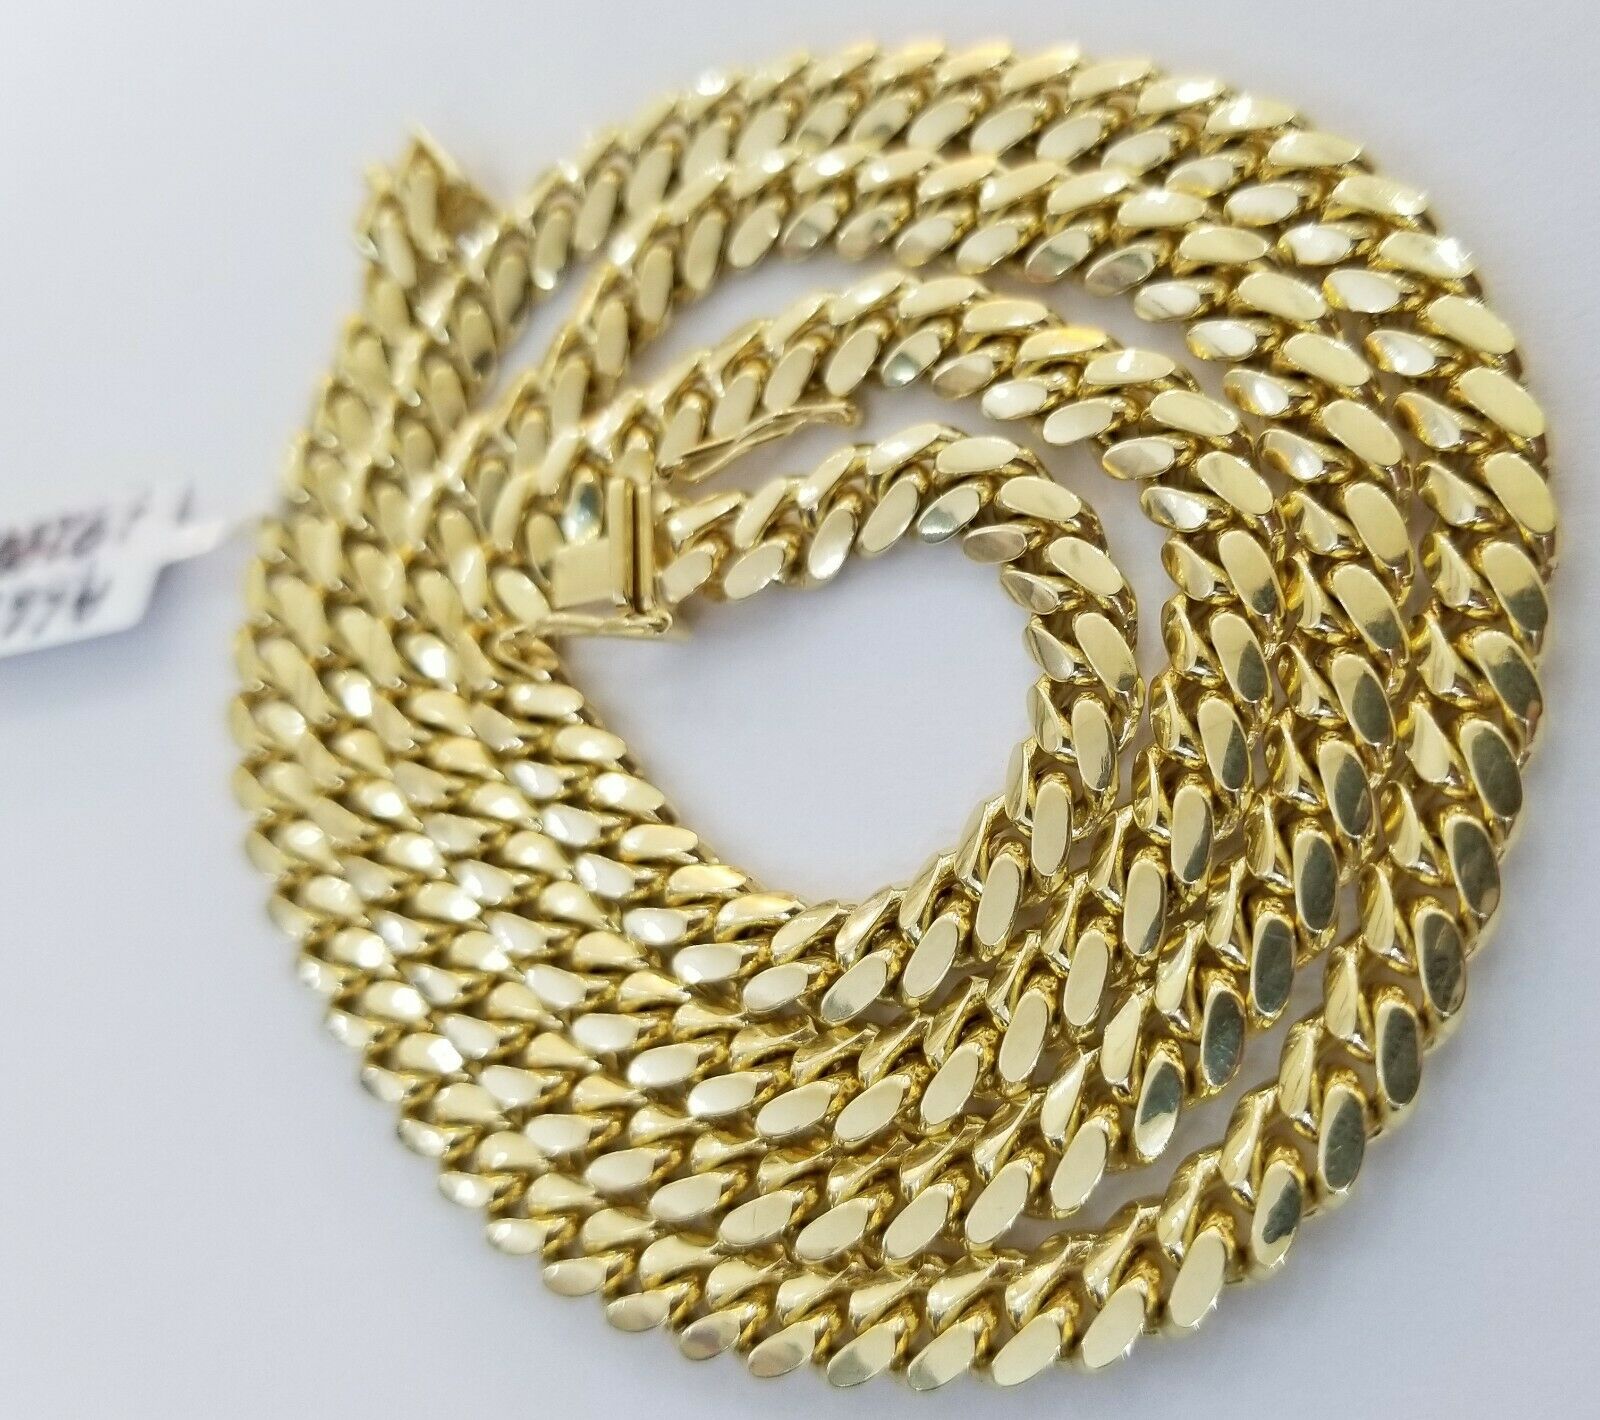 Mens 14k gold Thick Miami Cuban Link Choker necklace chain Gold Finish 6 mm  20